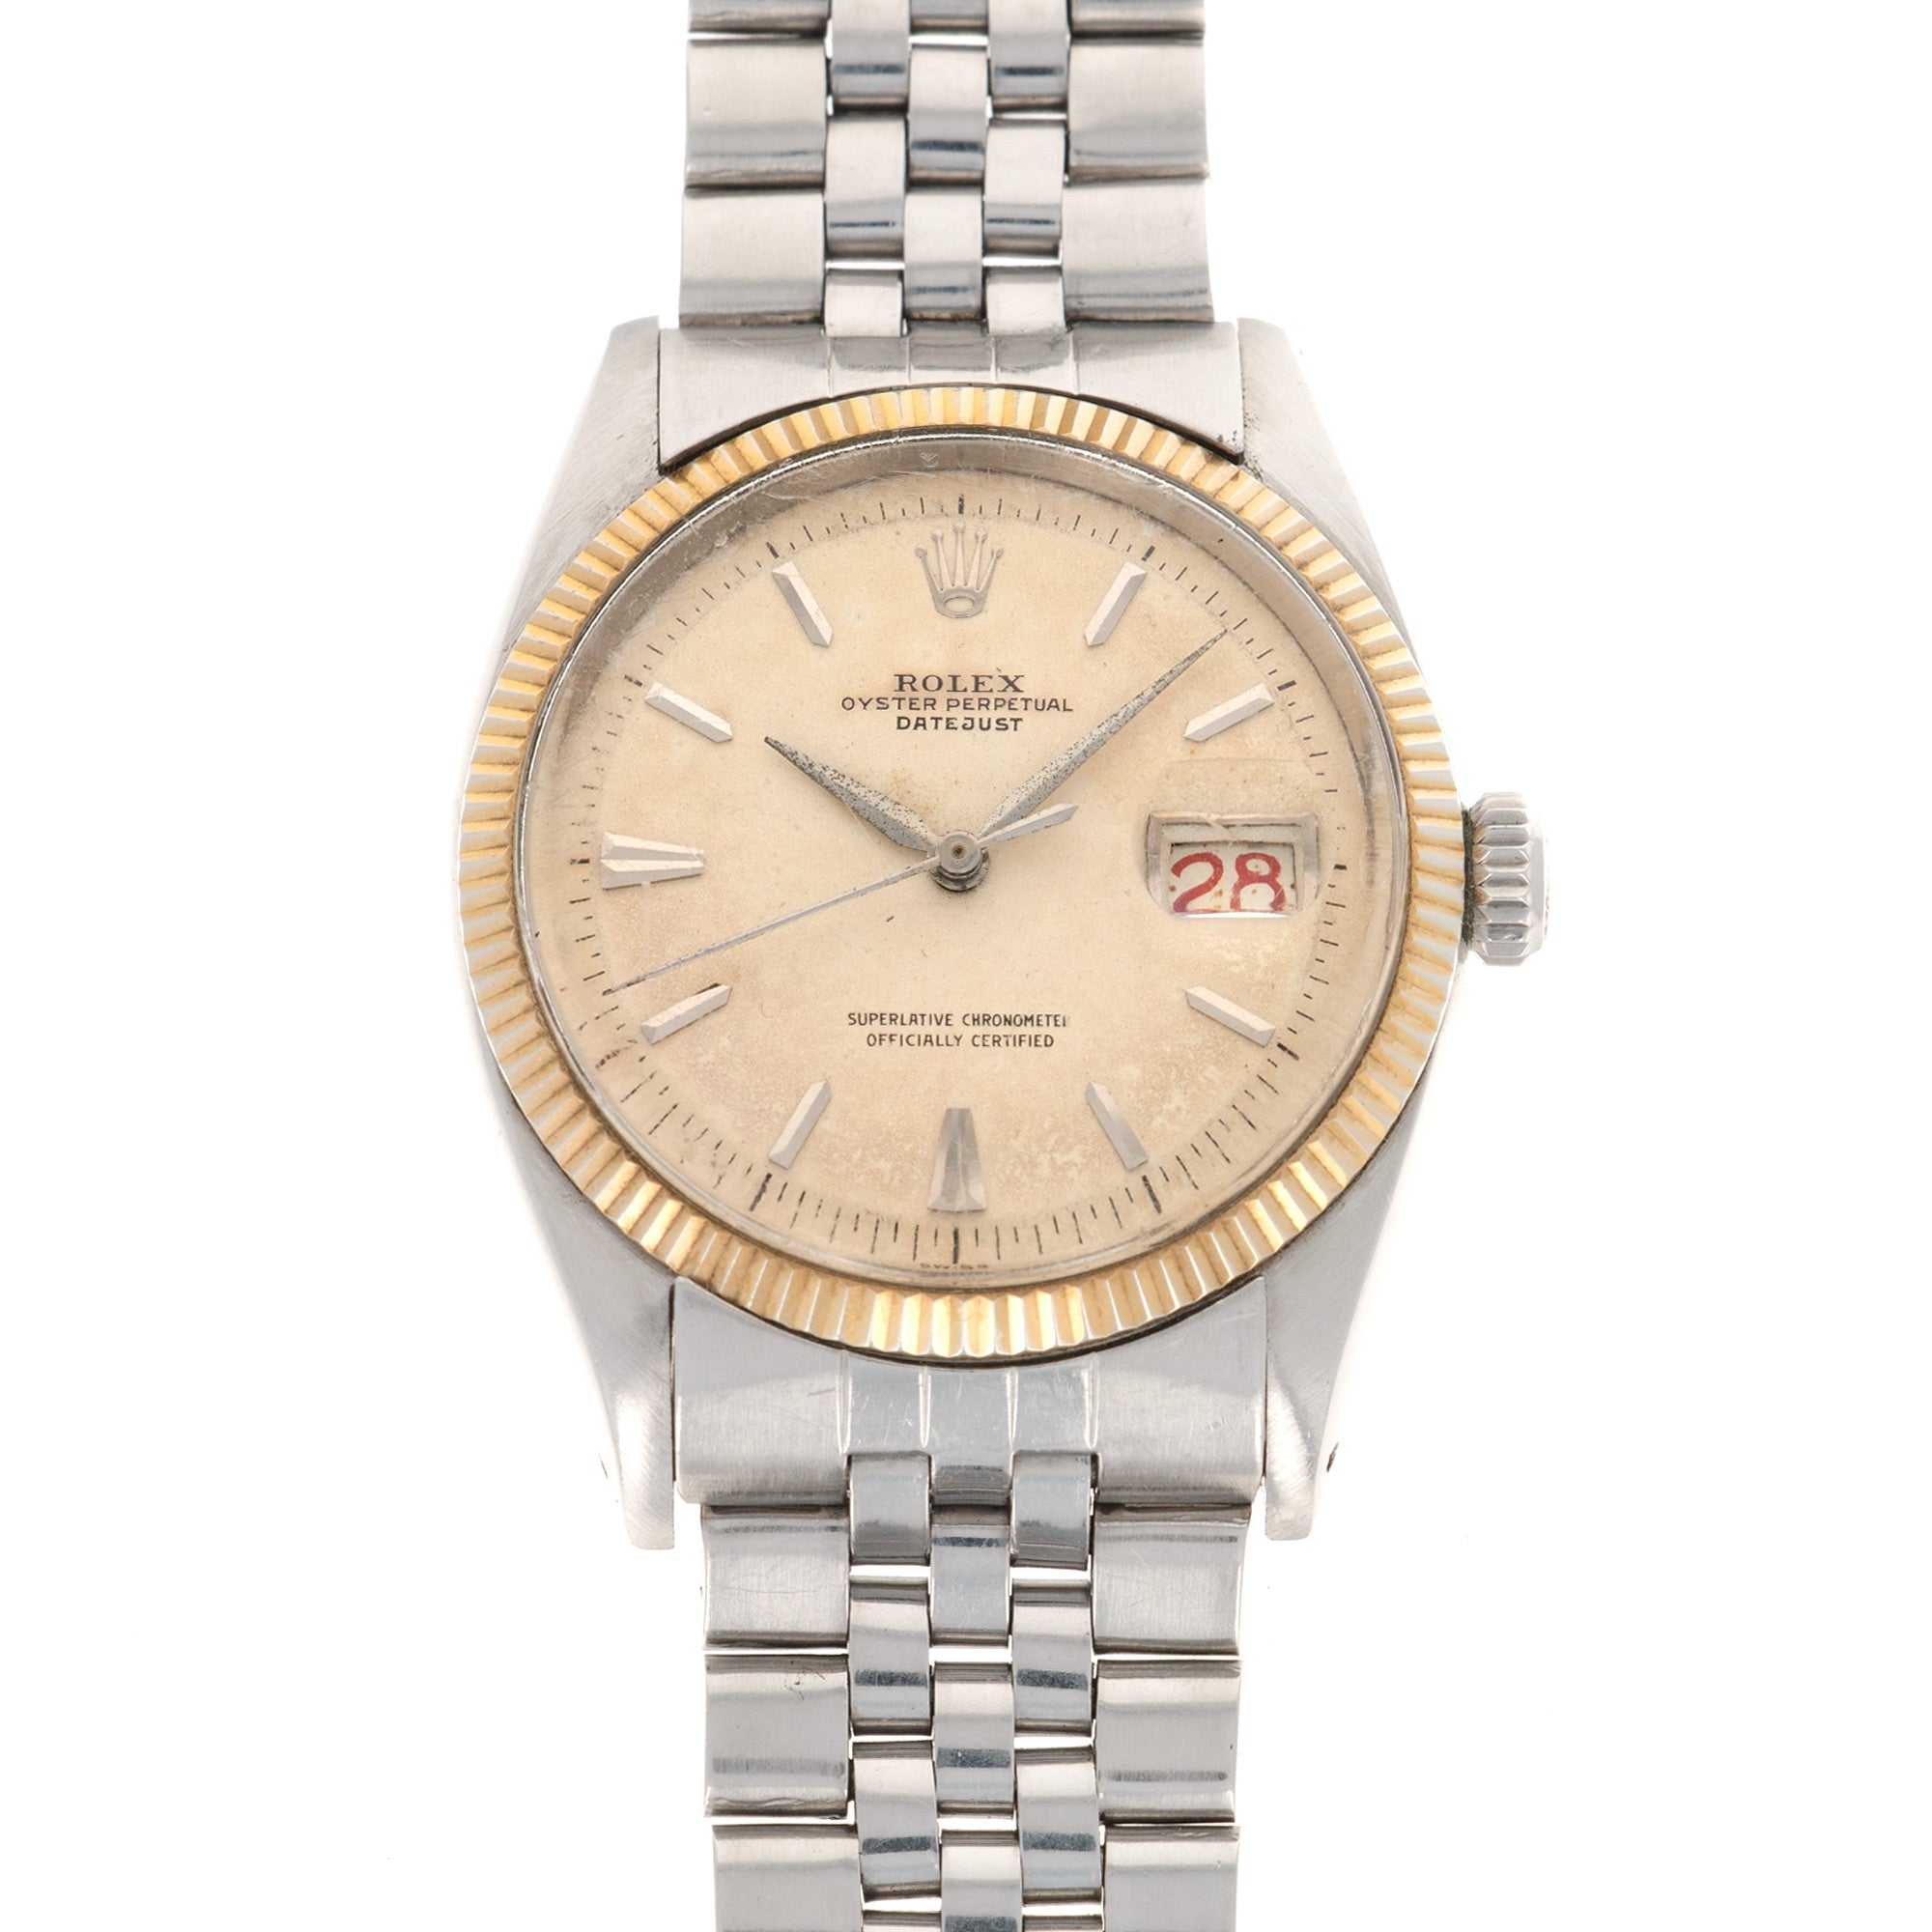 Rolex - Rolex Stainless Steel Early Datejust Watch Ref. 6605 - The Keystone Watches